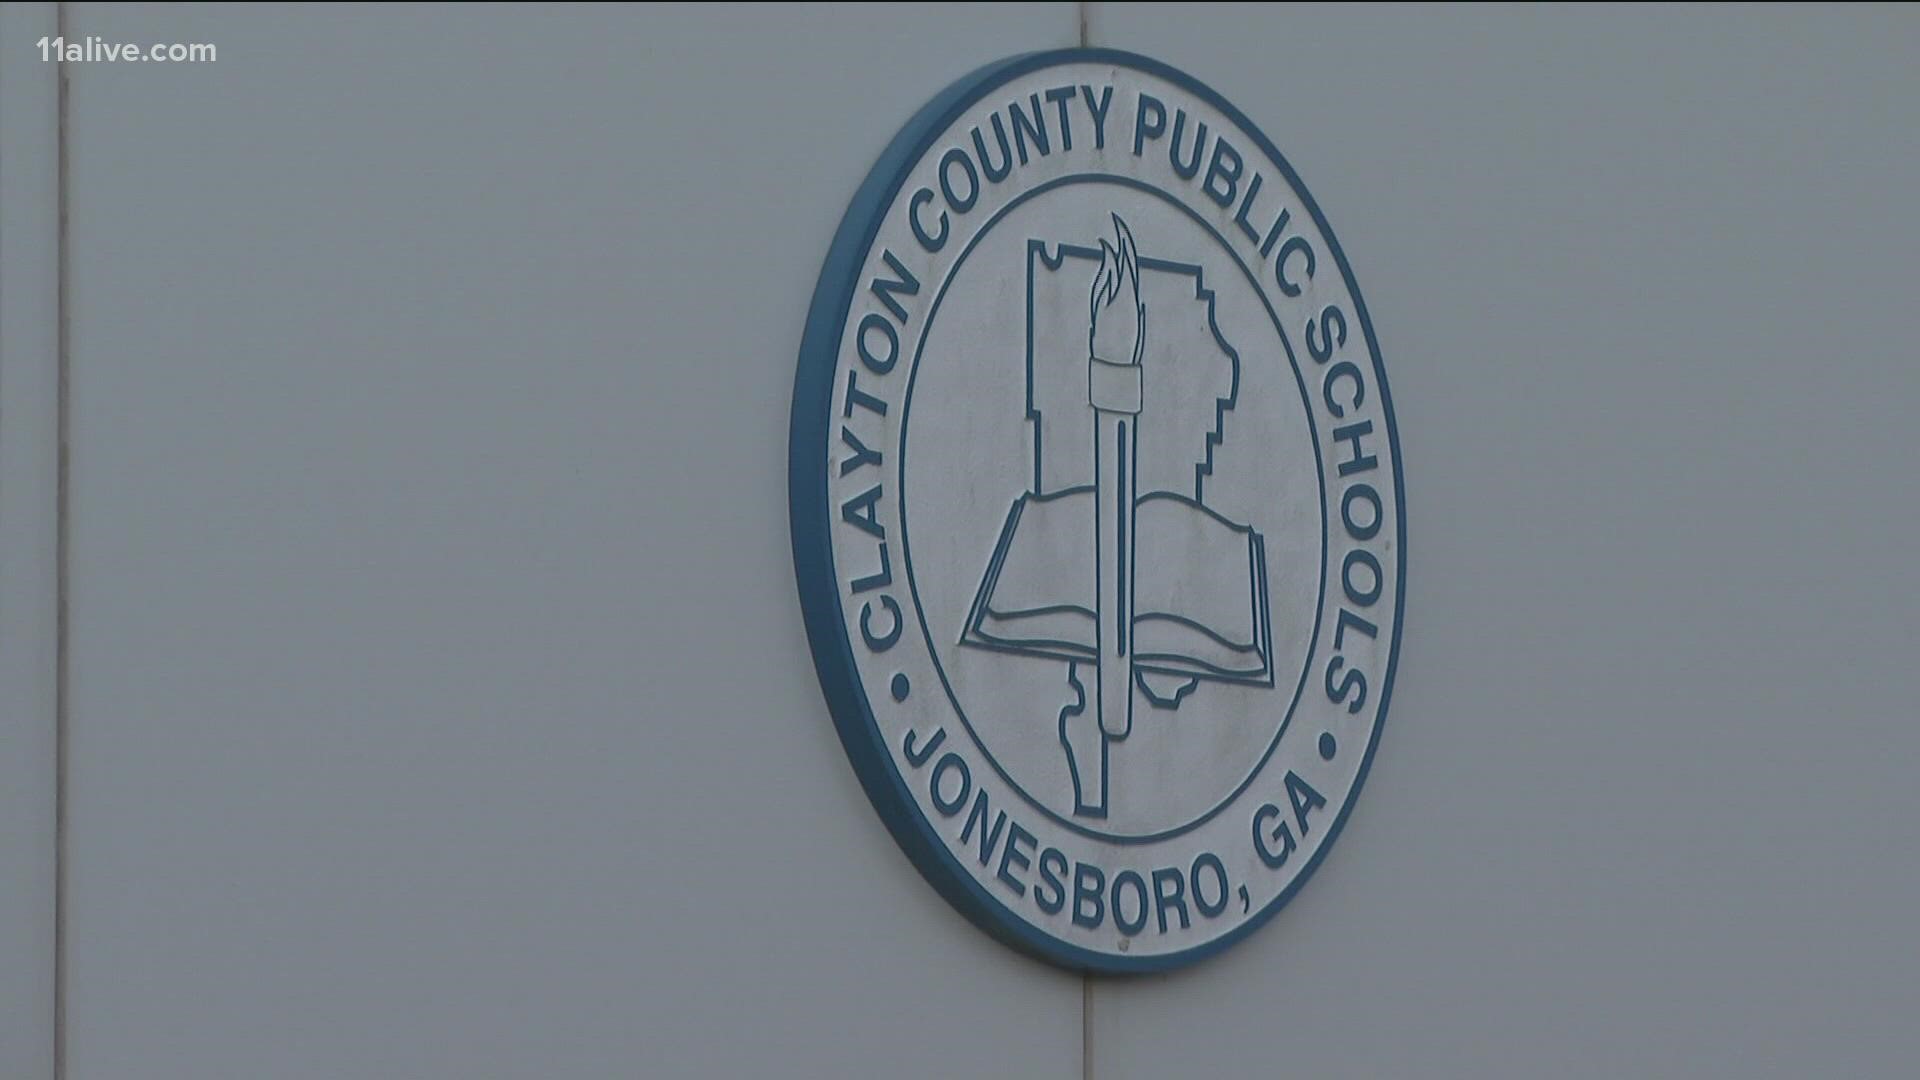 The end of the first week of January will be done remotely in Clayton County.